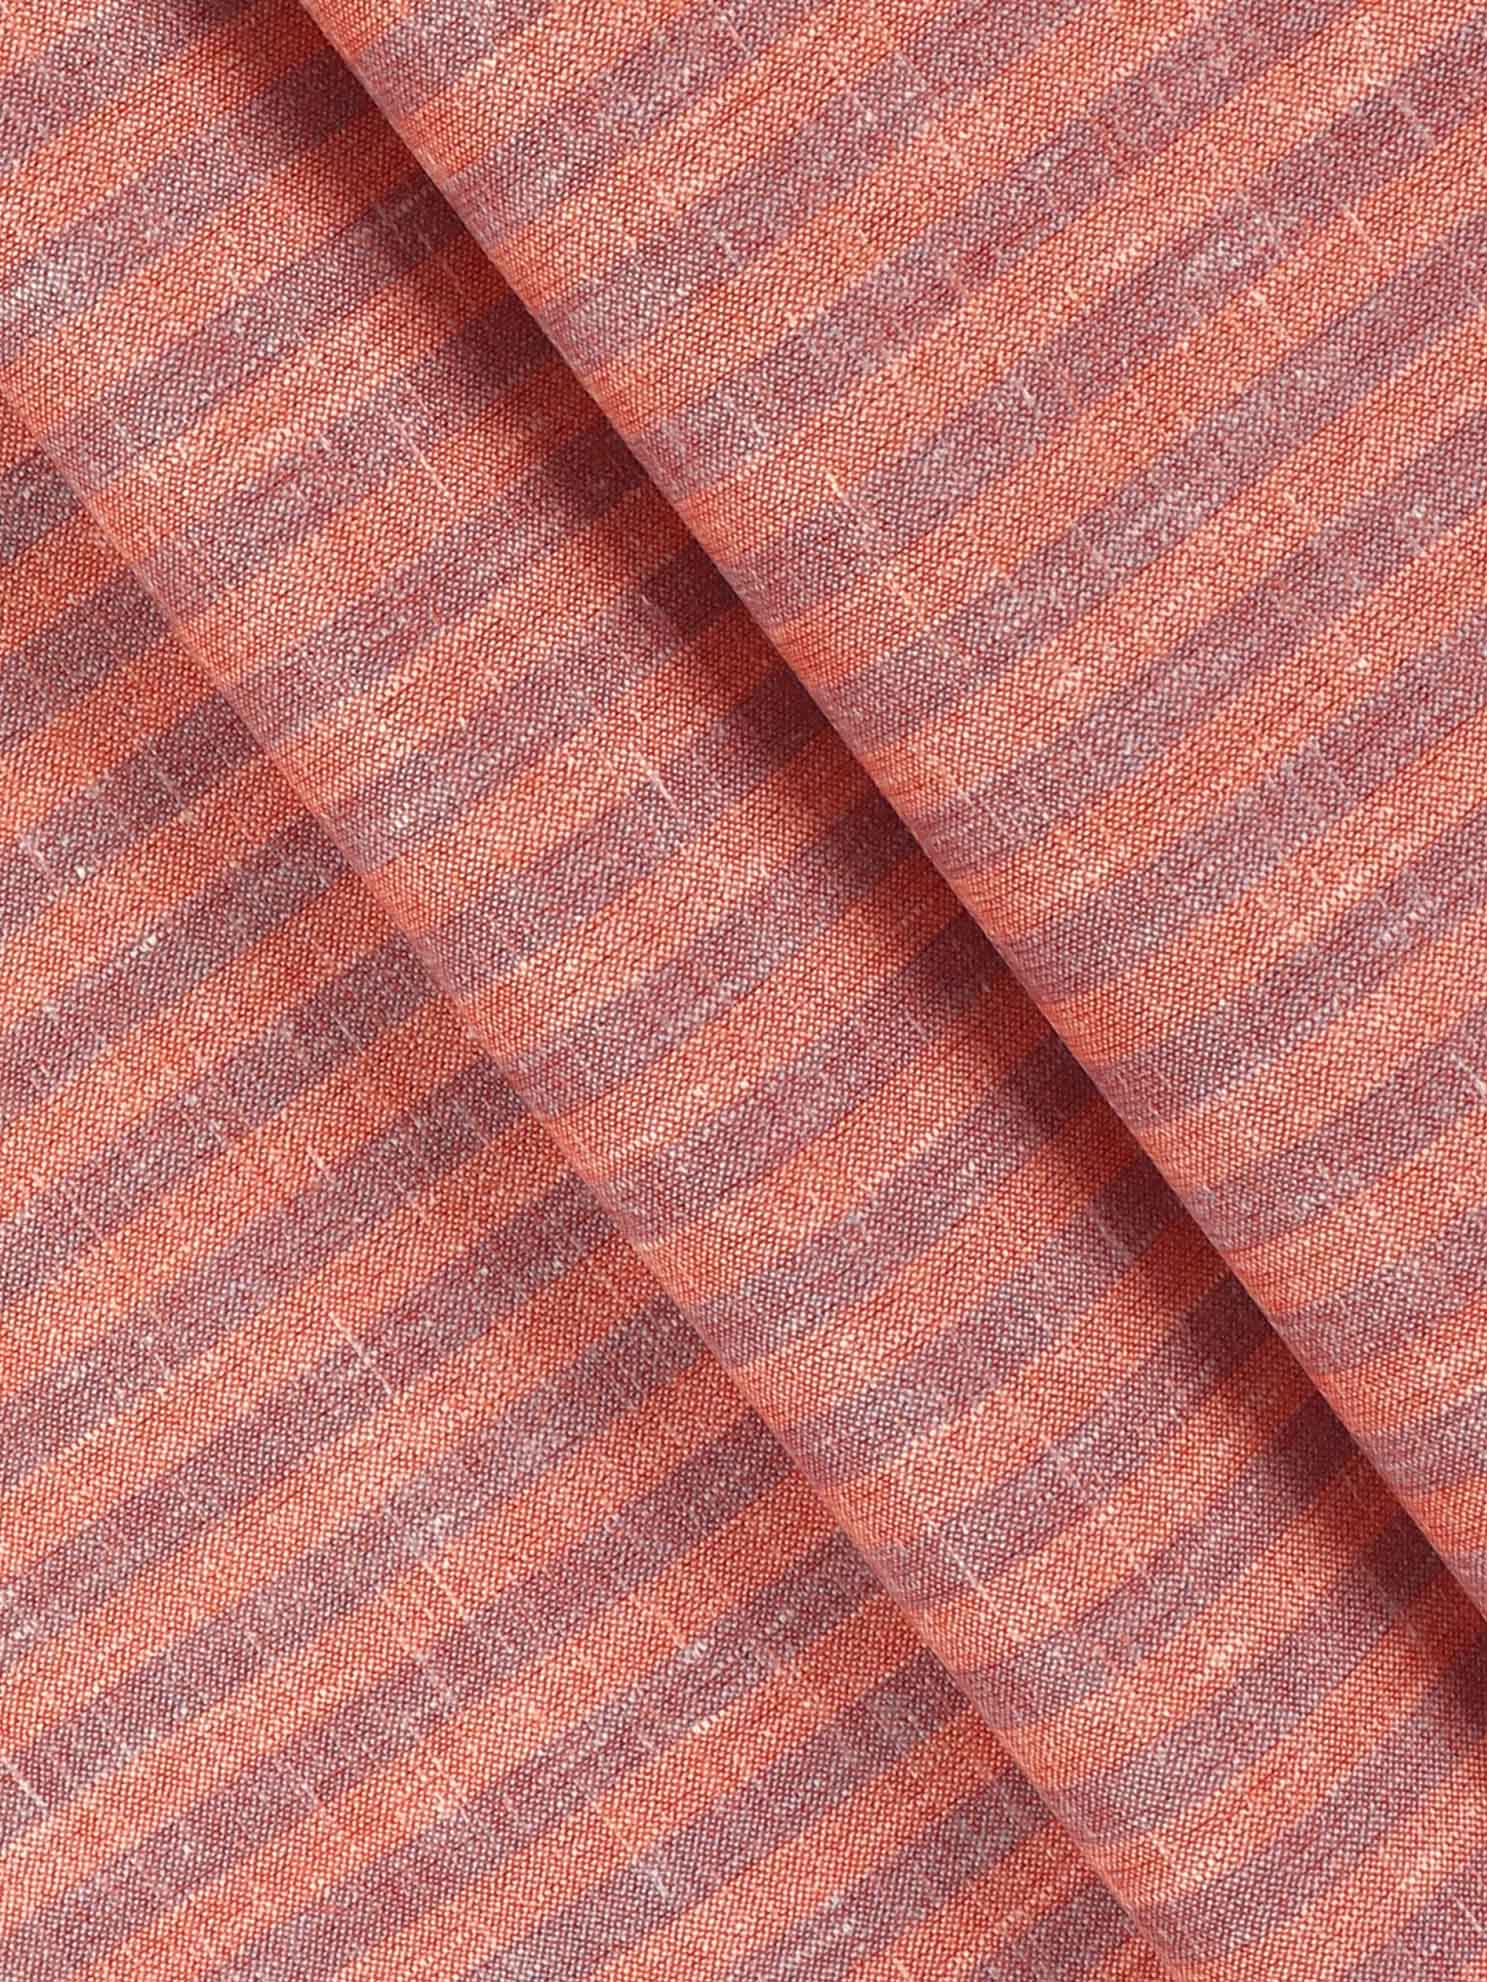 Cotton Blended Colour Striped Shirt Fabric Orange & Brown Elight Gold